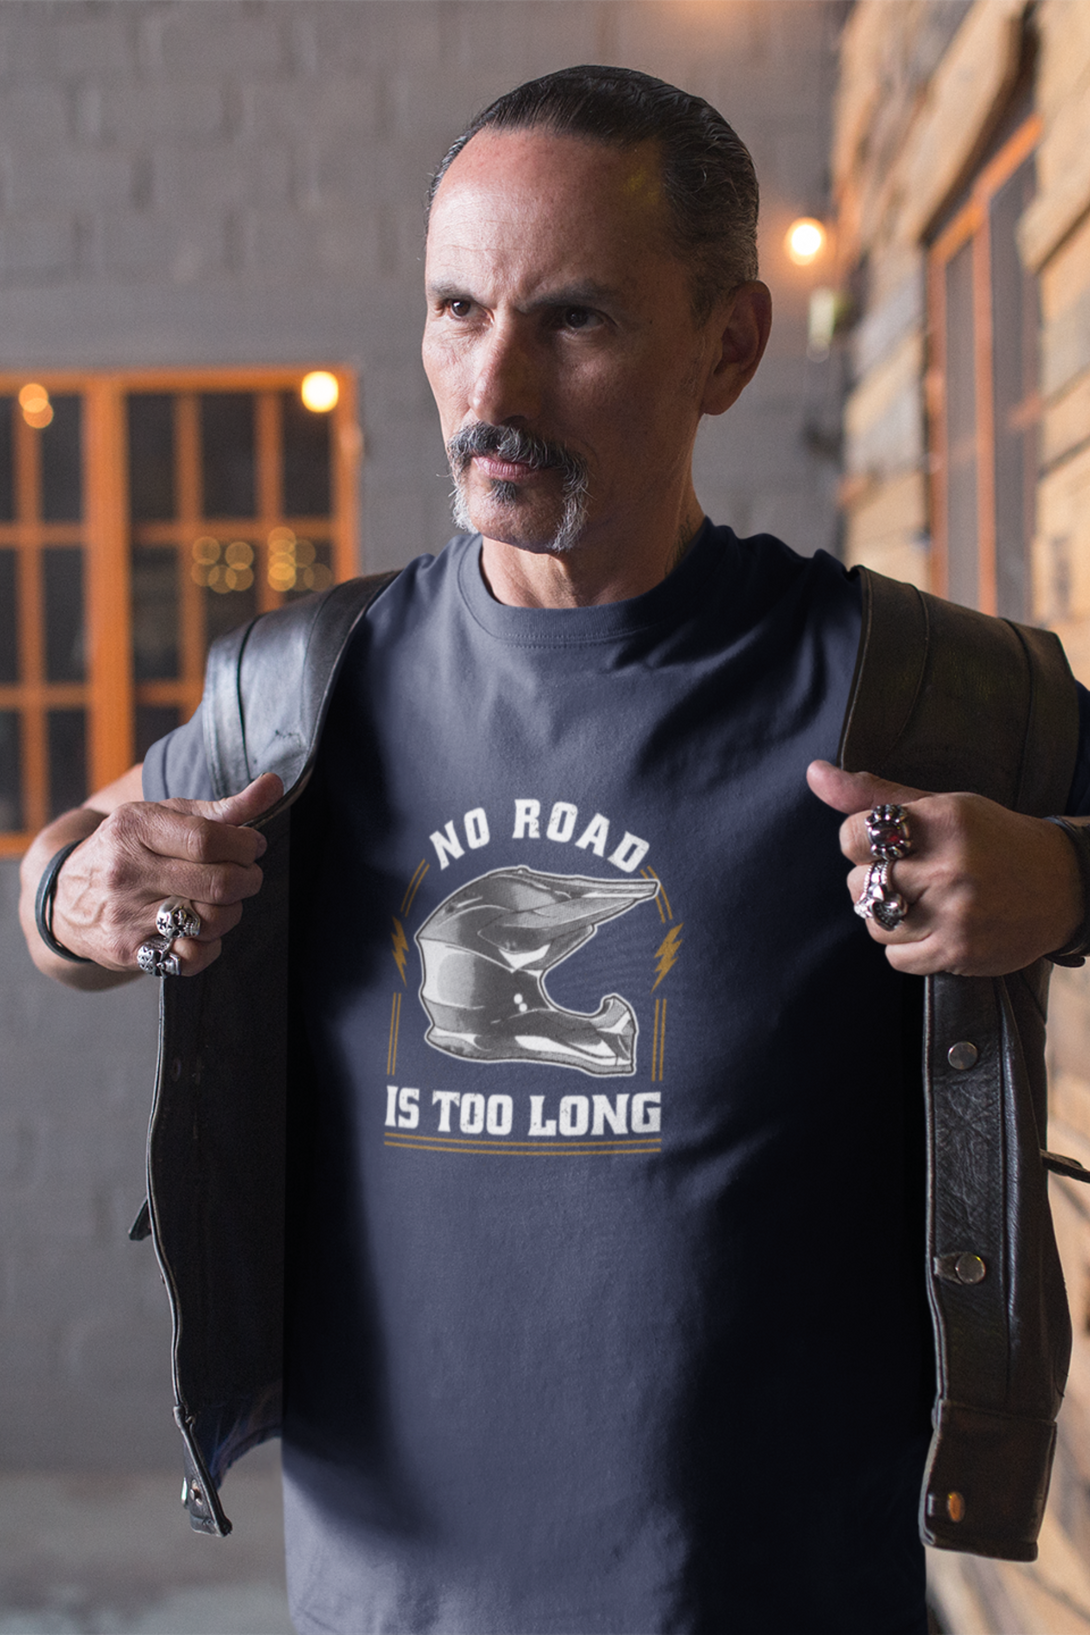 No Road Is Too Long Printed T-Shirt For Men - WowWaves - 7